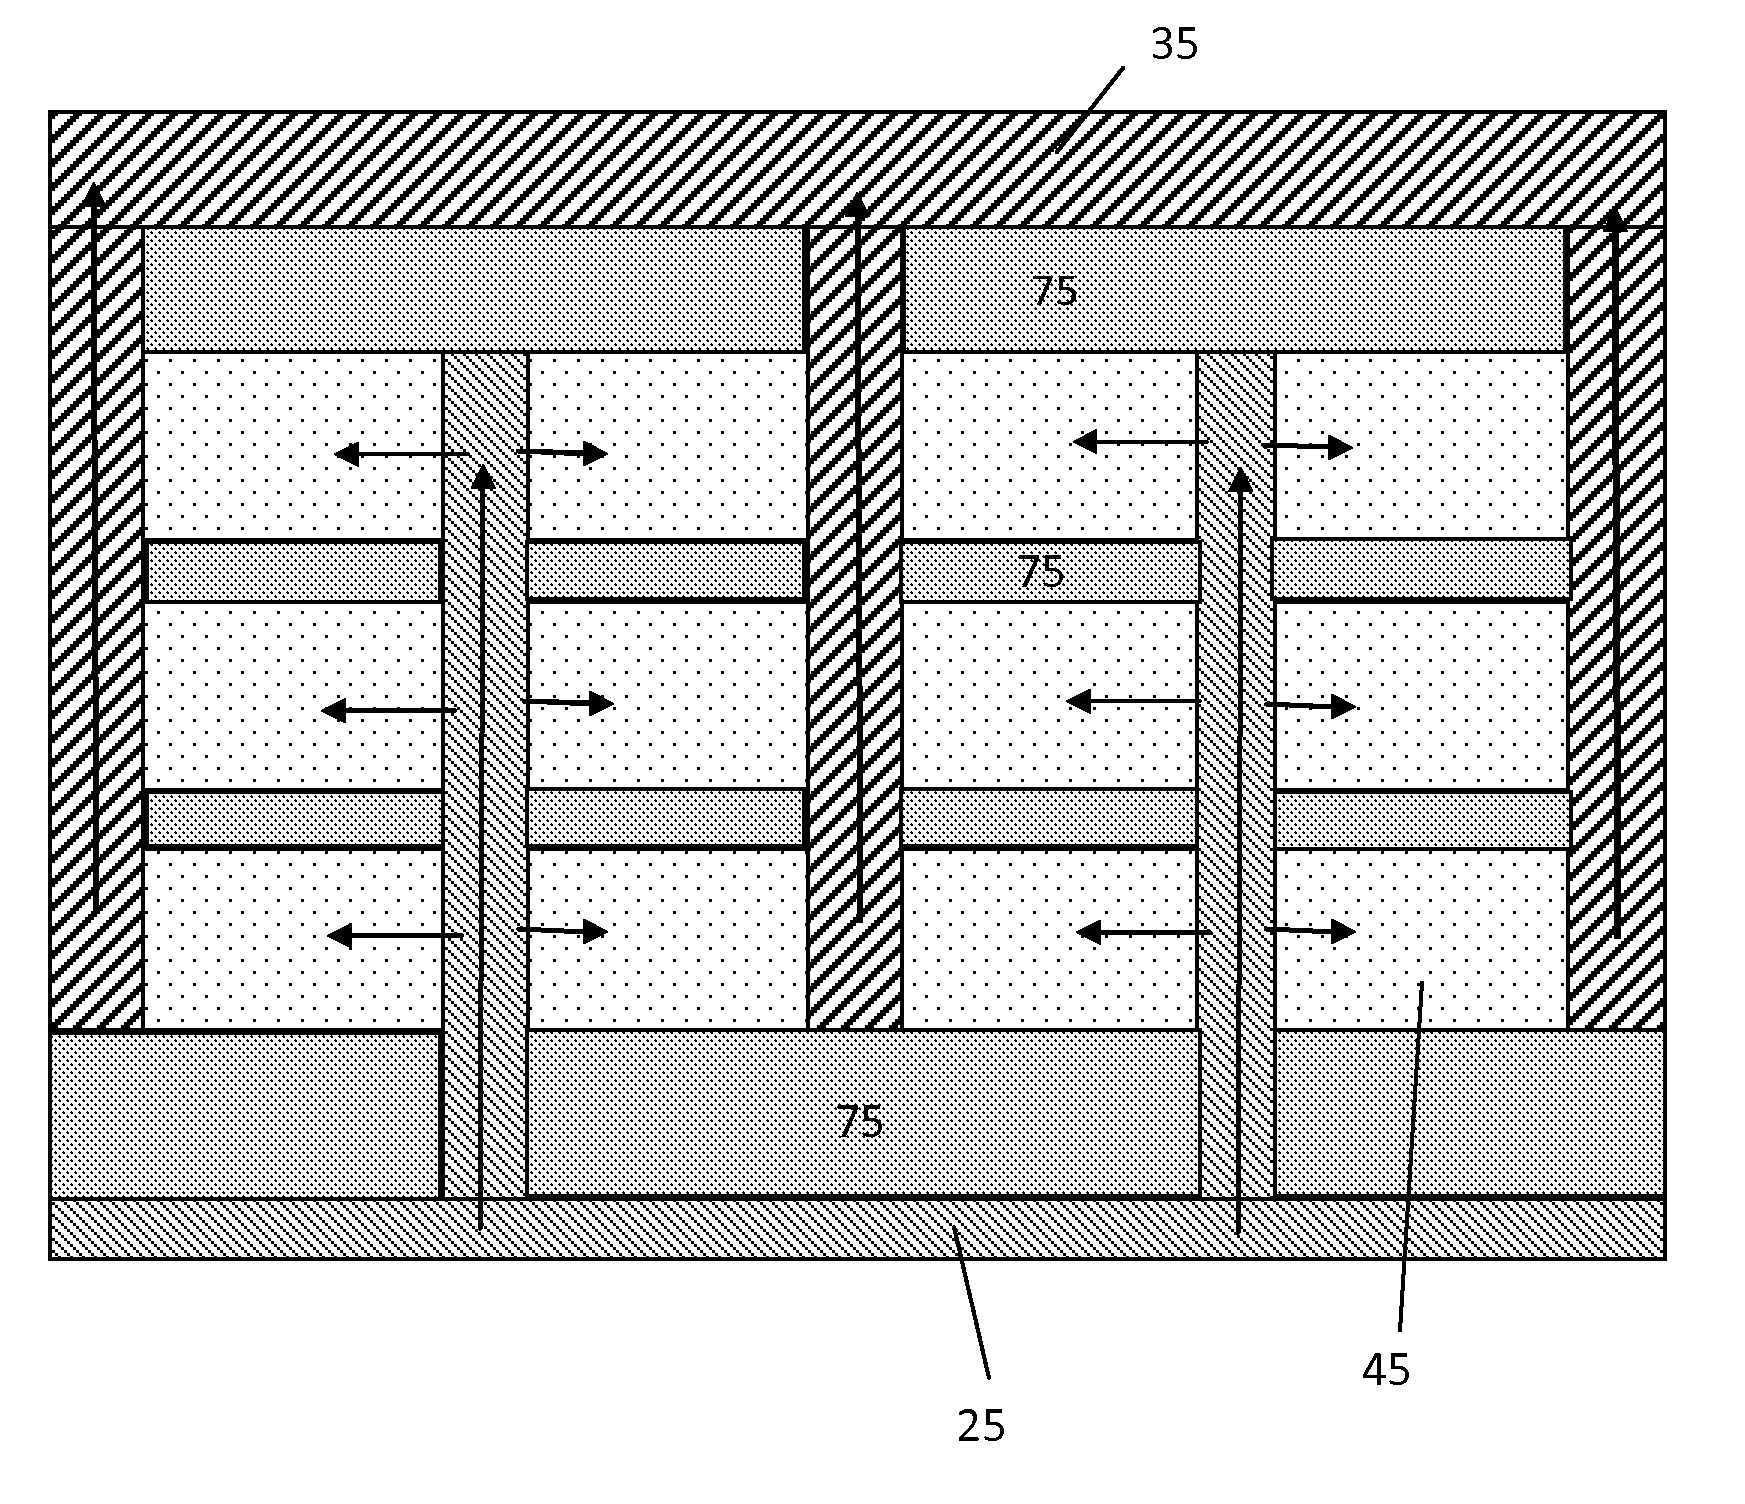 Preparation of thin layers of a fluid containing cells for analysis